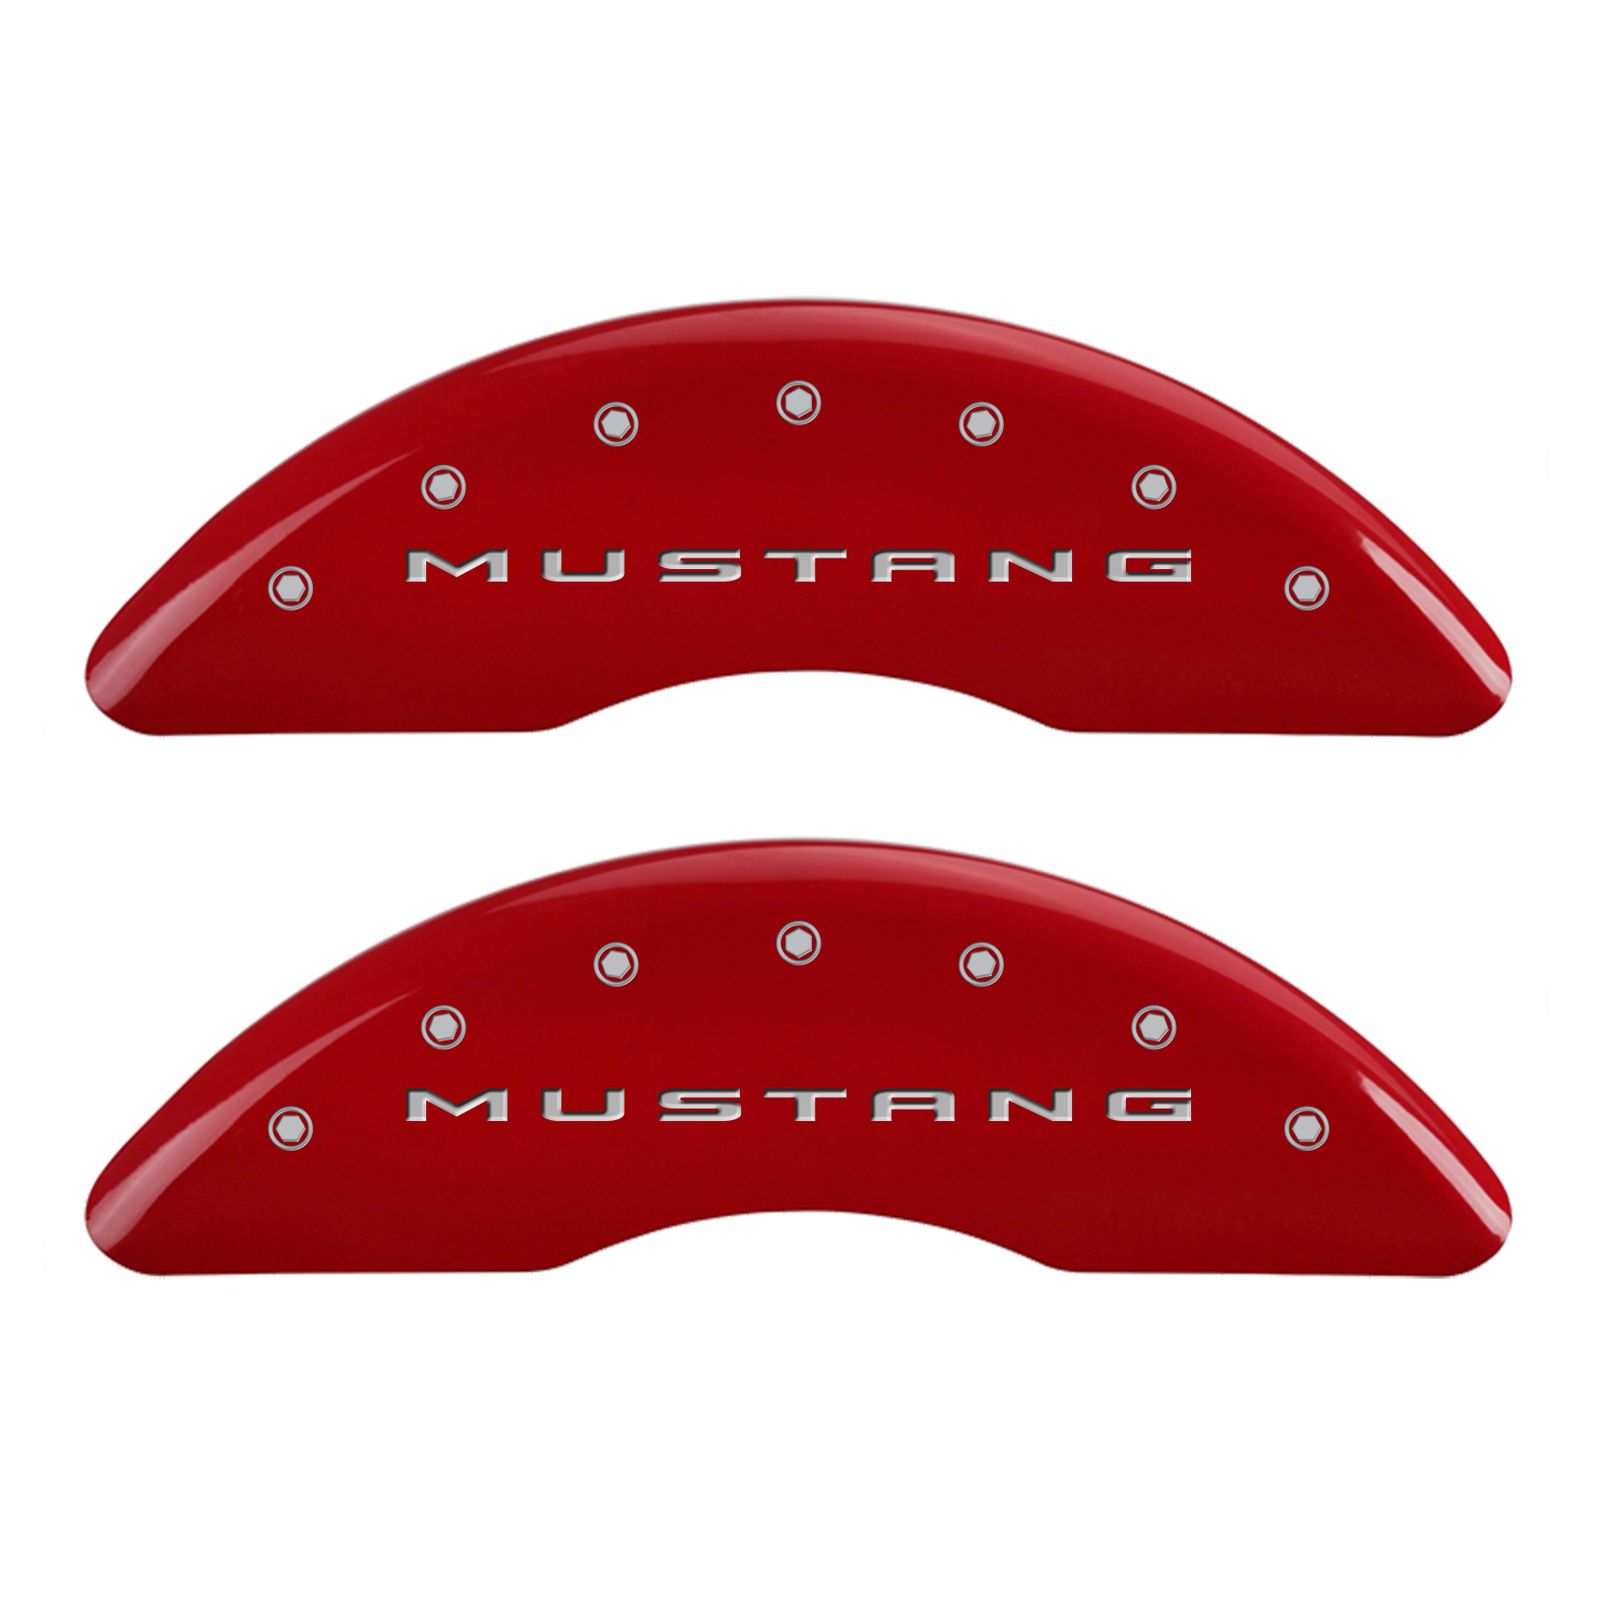 S197 Red Brake Covers Mustang/GT MGP Caliper Covers 10197SMG2RD for 2005-2009 Ford Mustang Set of 4 